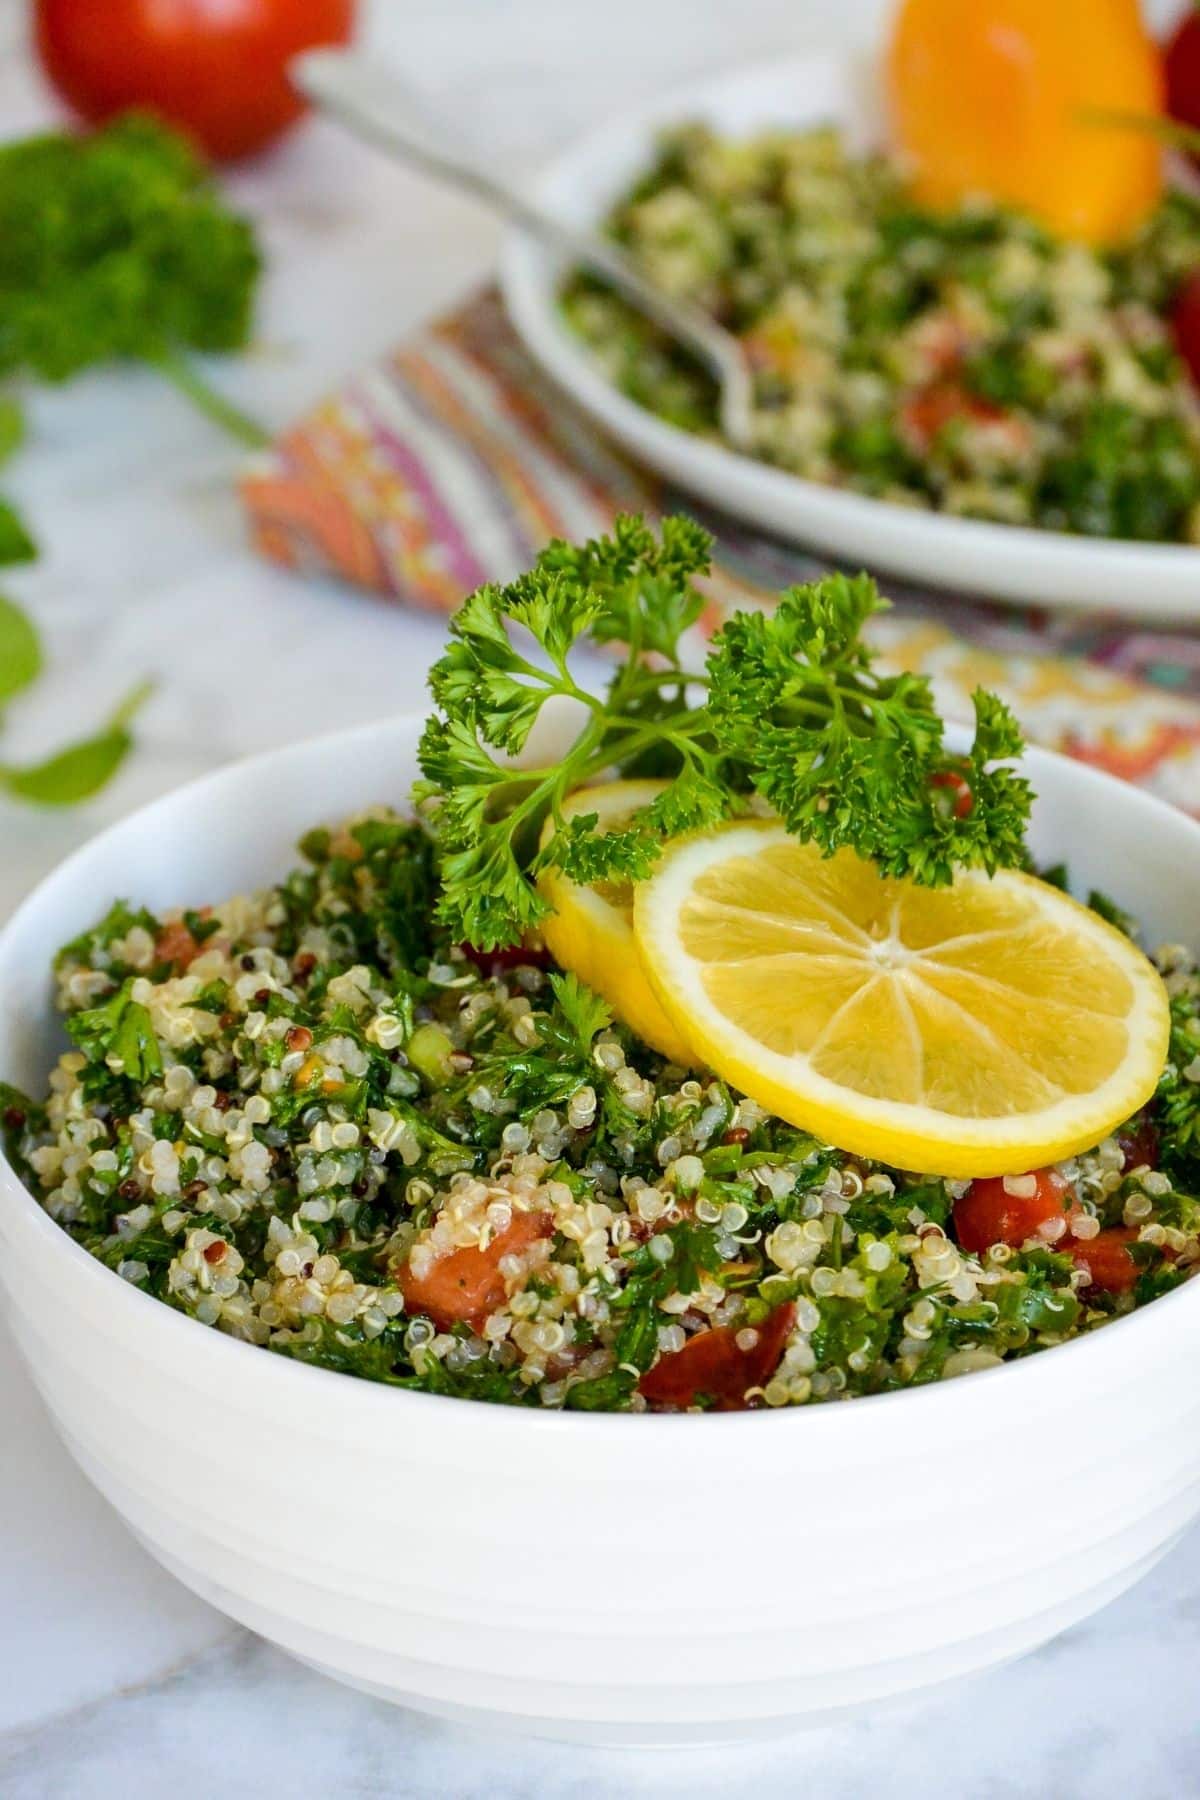 Bowl of quinoa tabbouleh garnished with lemon slices and sprig of parsley